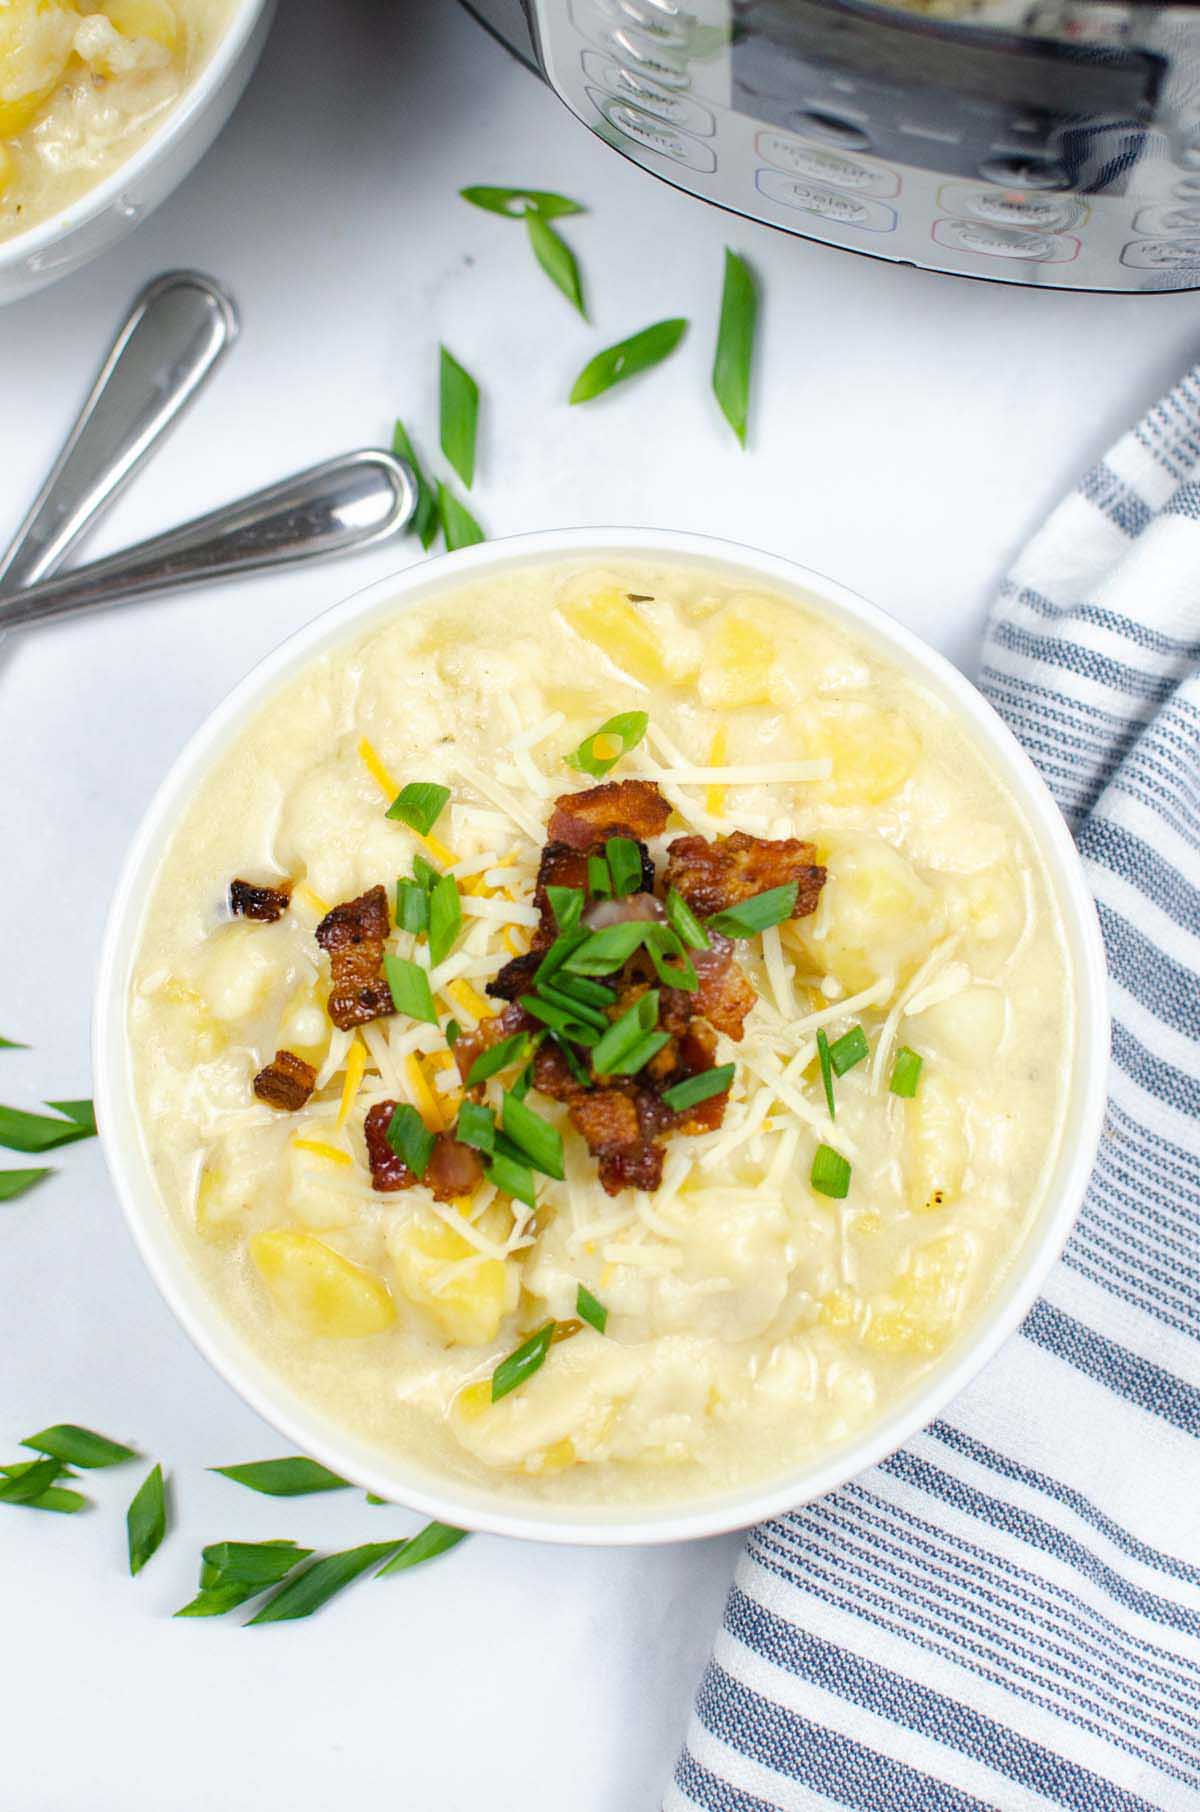 Potato soup in a bowl garnished with bacon and green onions.